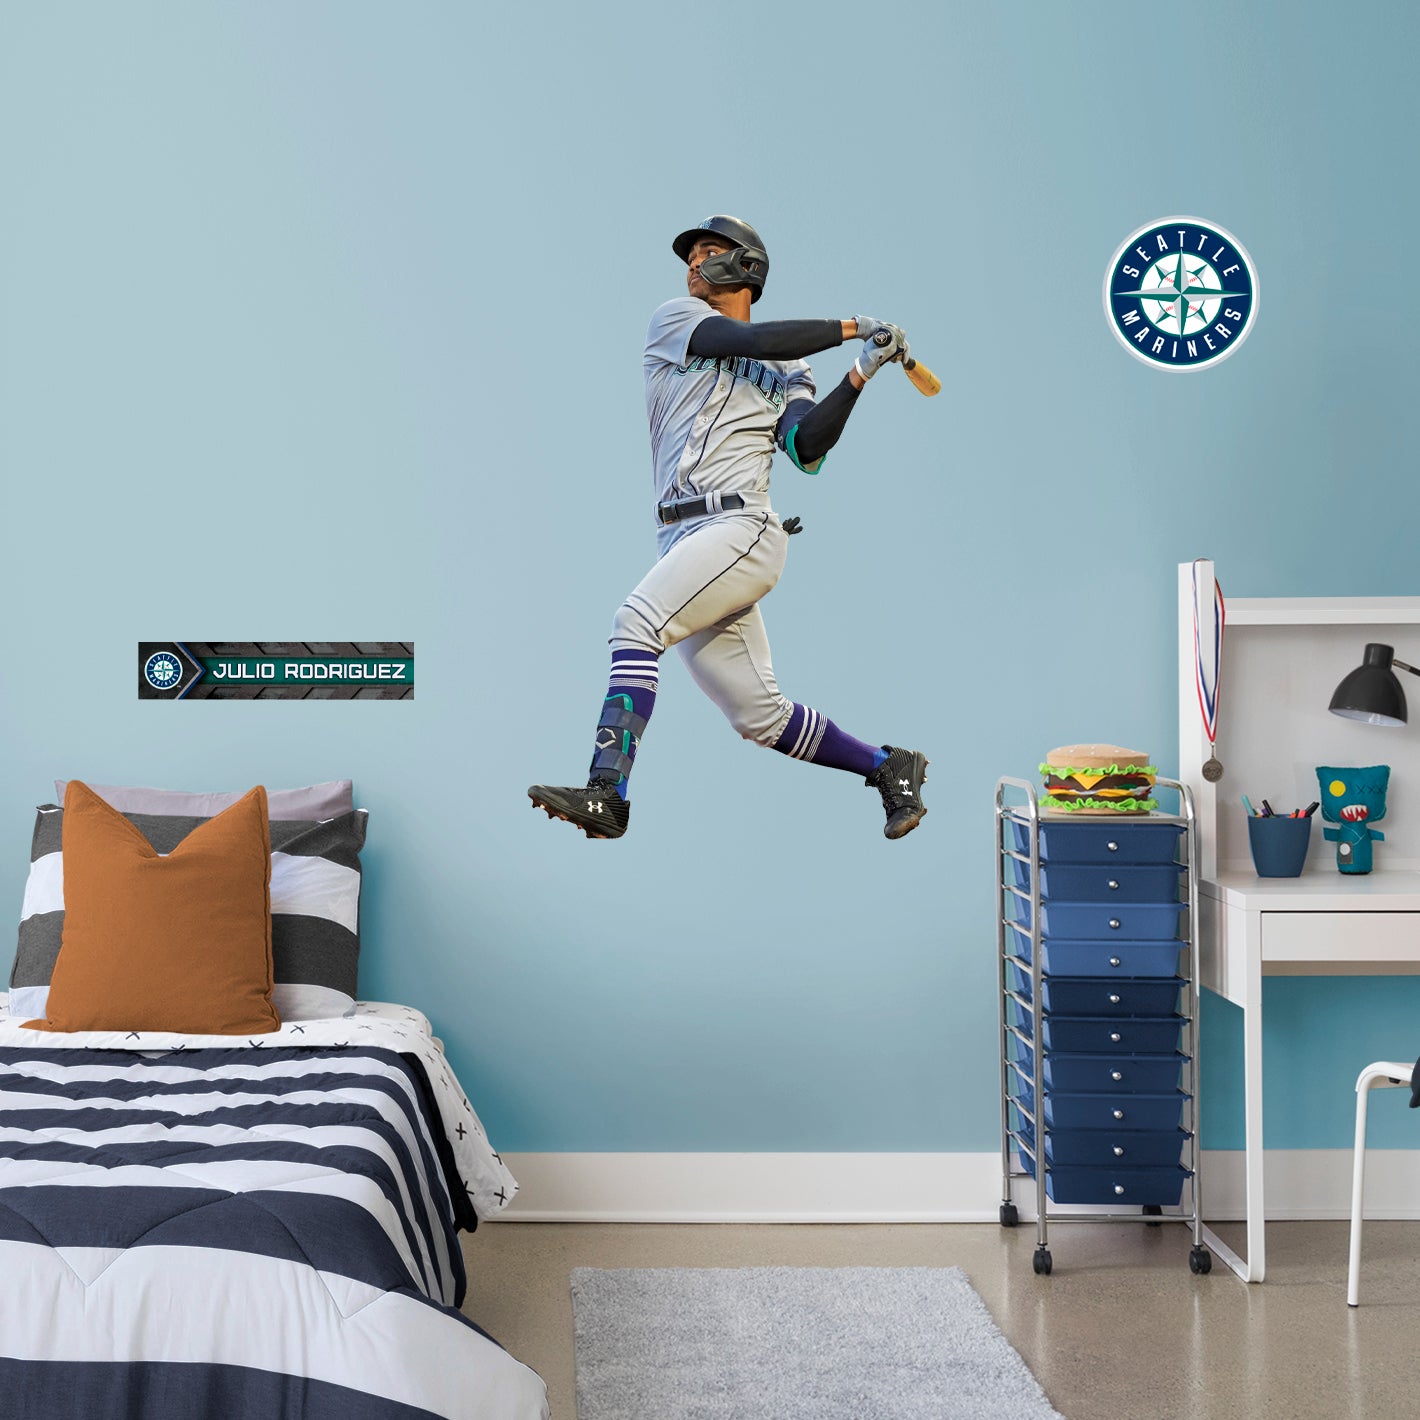 Seattle Mariners: Julio Rodriguez - Officially Licensed MLB Removable Adhesive Decal